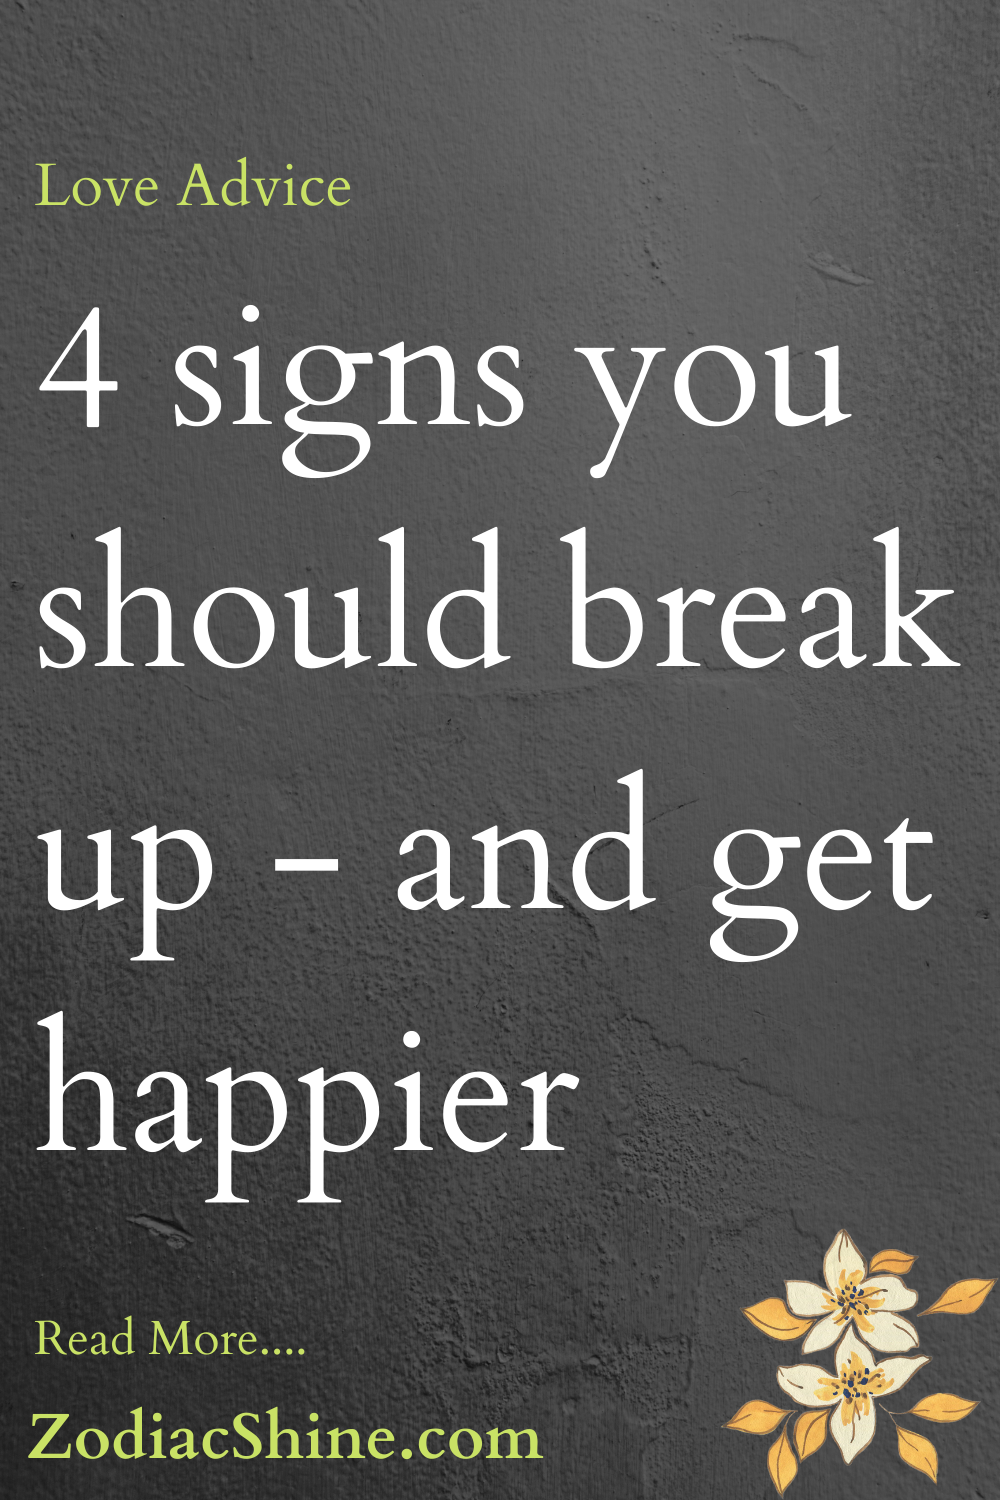 4 signs you should break up - and get happier